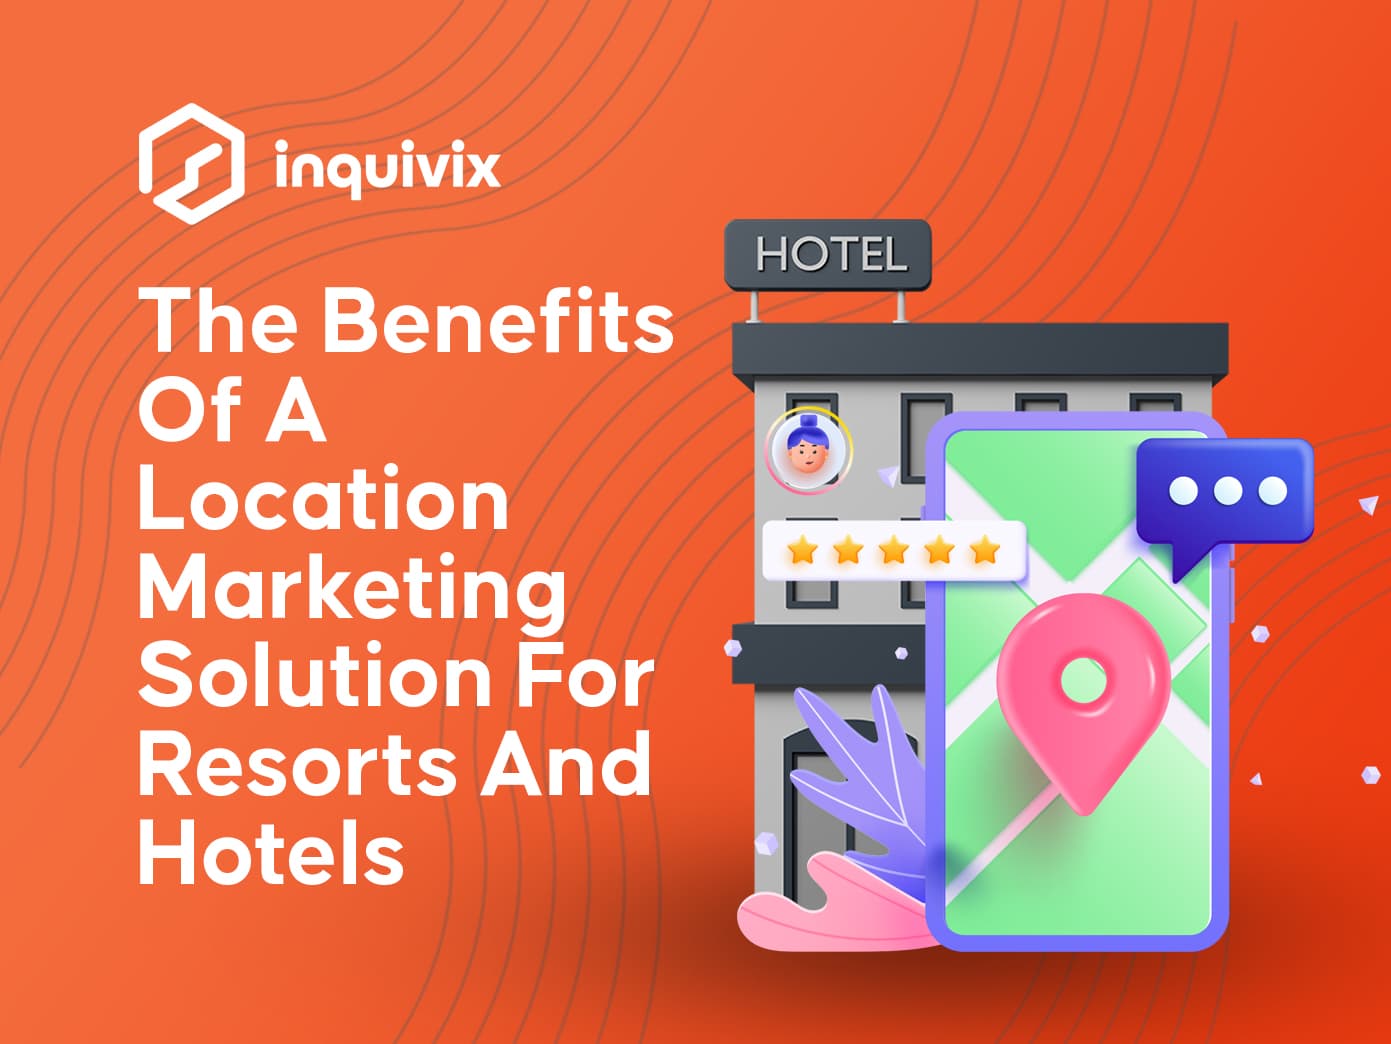 The Benefits Of A Location Marketing Solution For Resorts And Hotels | INQUIVIX